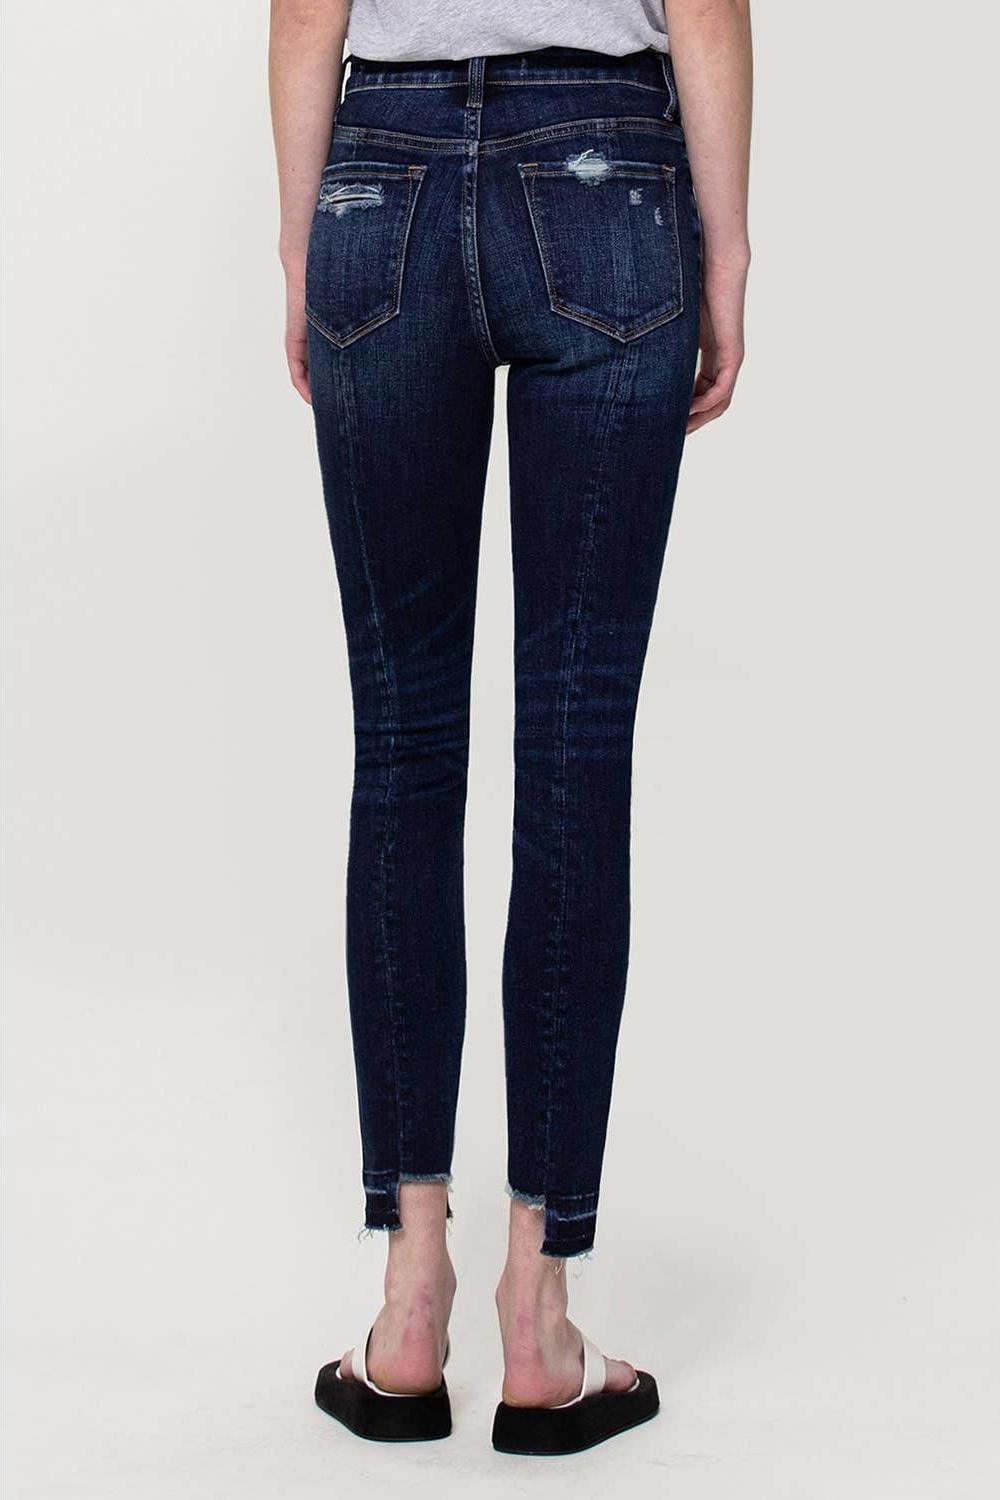 Seamed Panel Ankle Skinny Jeans - Strawberry Moon Boutique